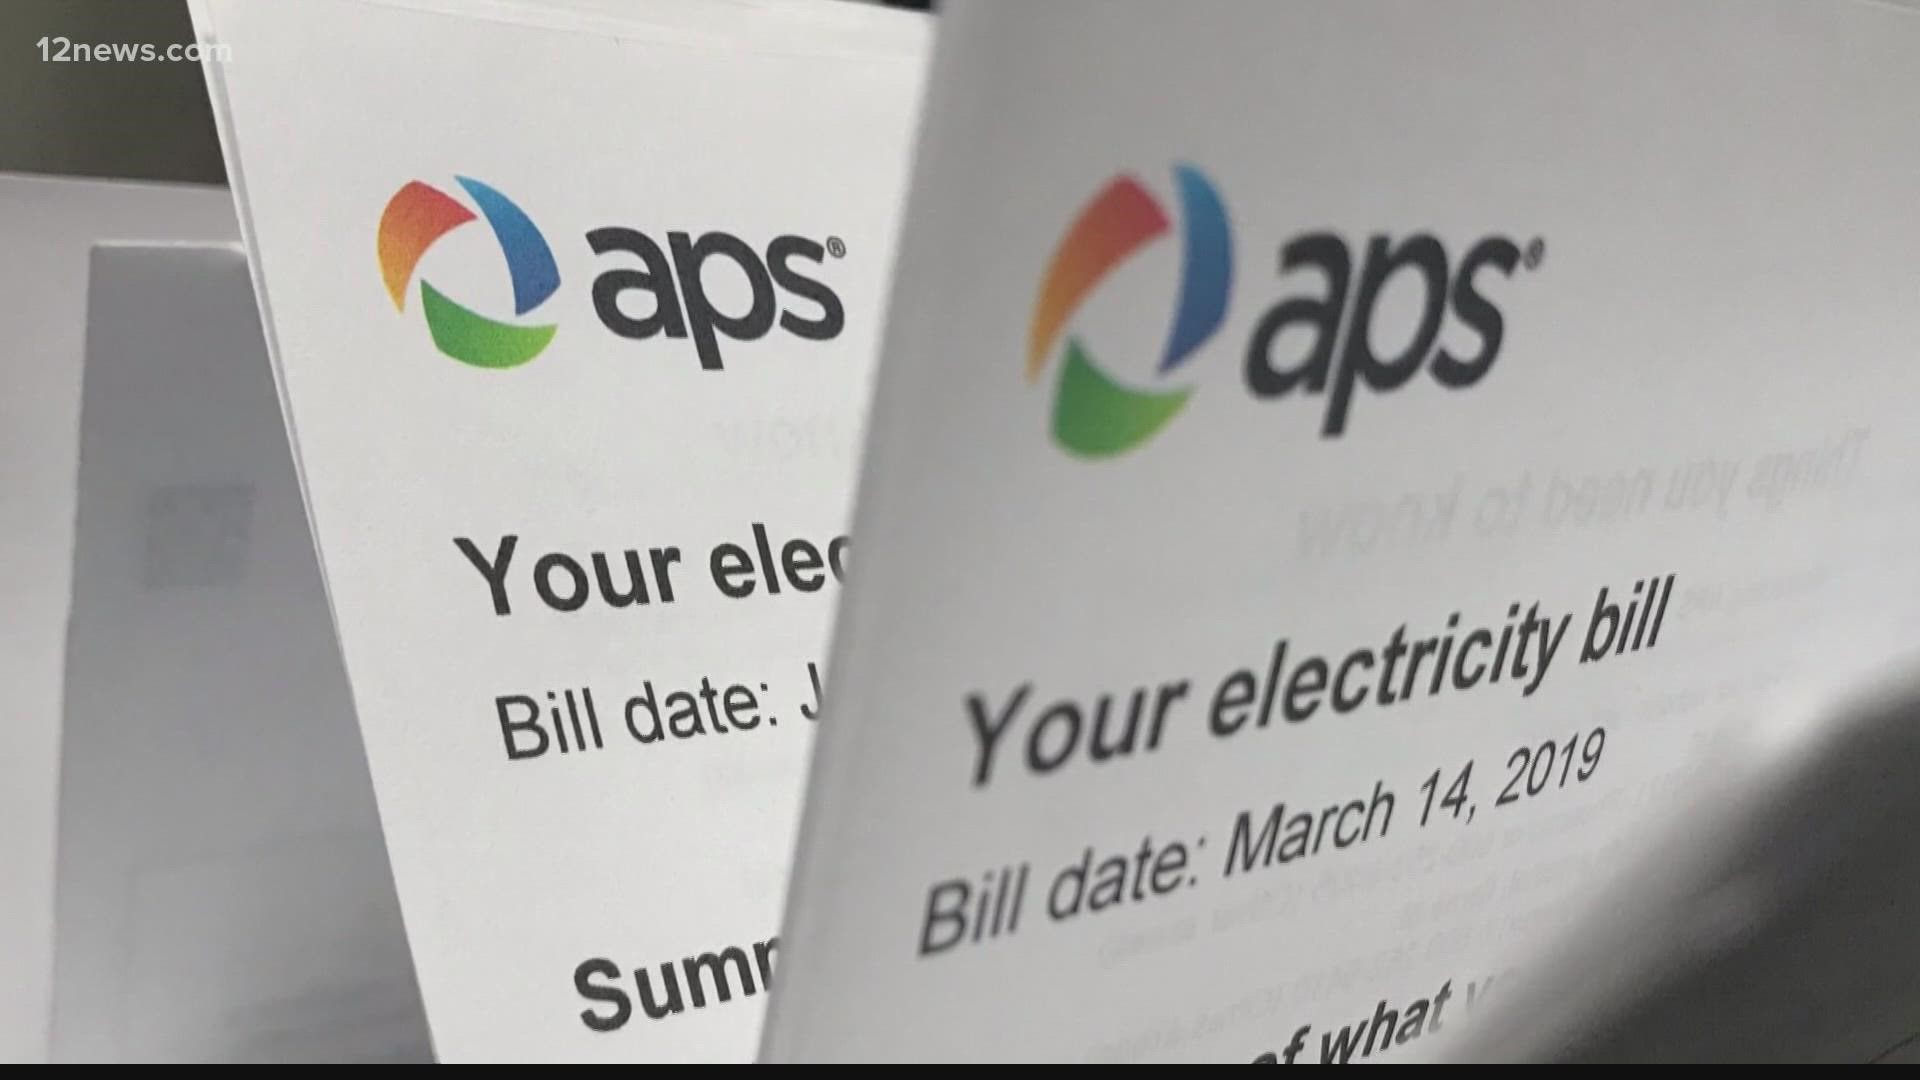 Major decisions are ahead this week for regulators in charge of keeping the power company APS in check. The Corporation Commission will vote on several issues.